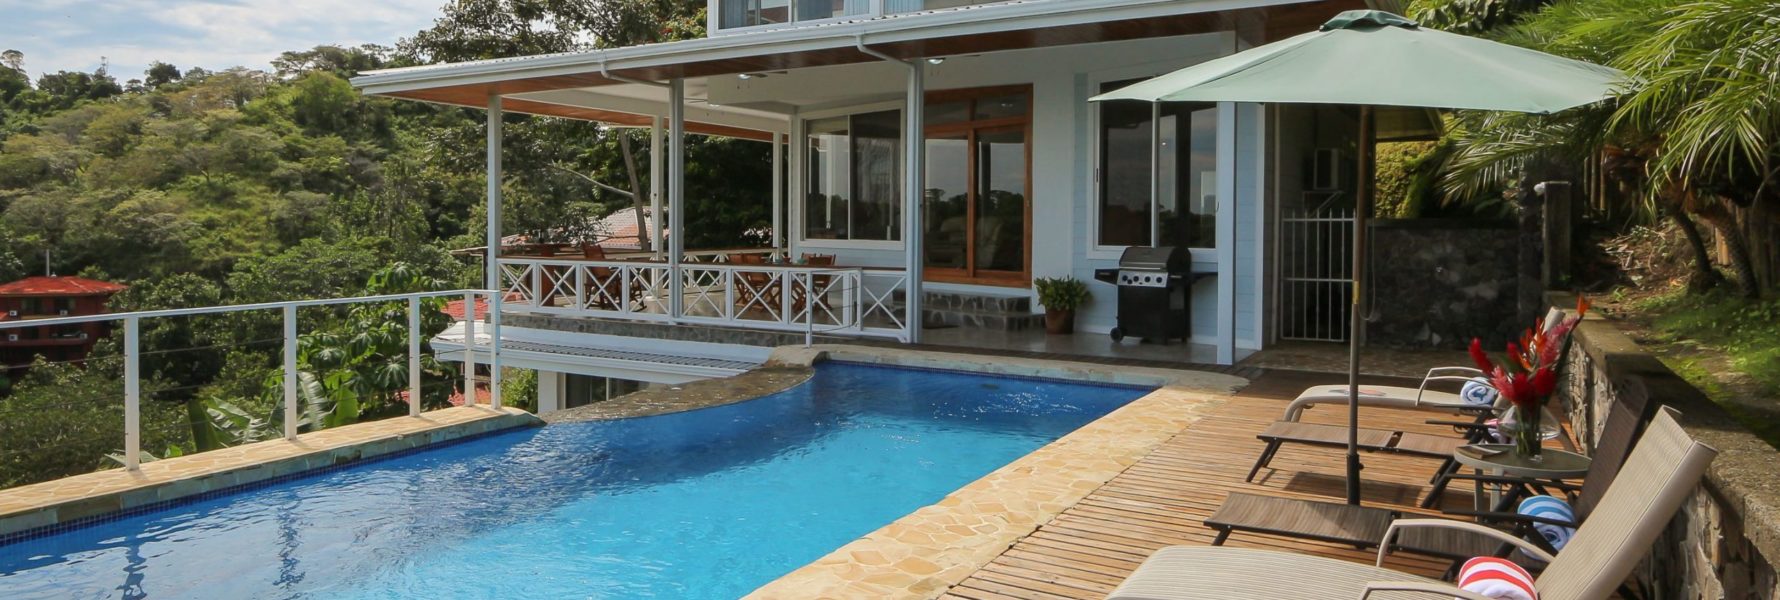 This gorgeous luxury home in Manuel Antonio features private two level infinity pools